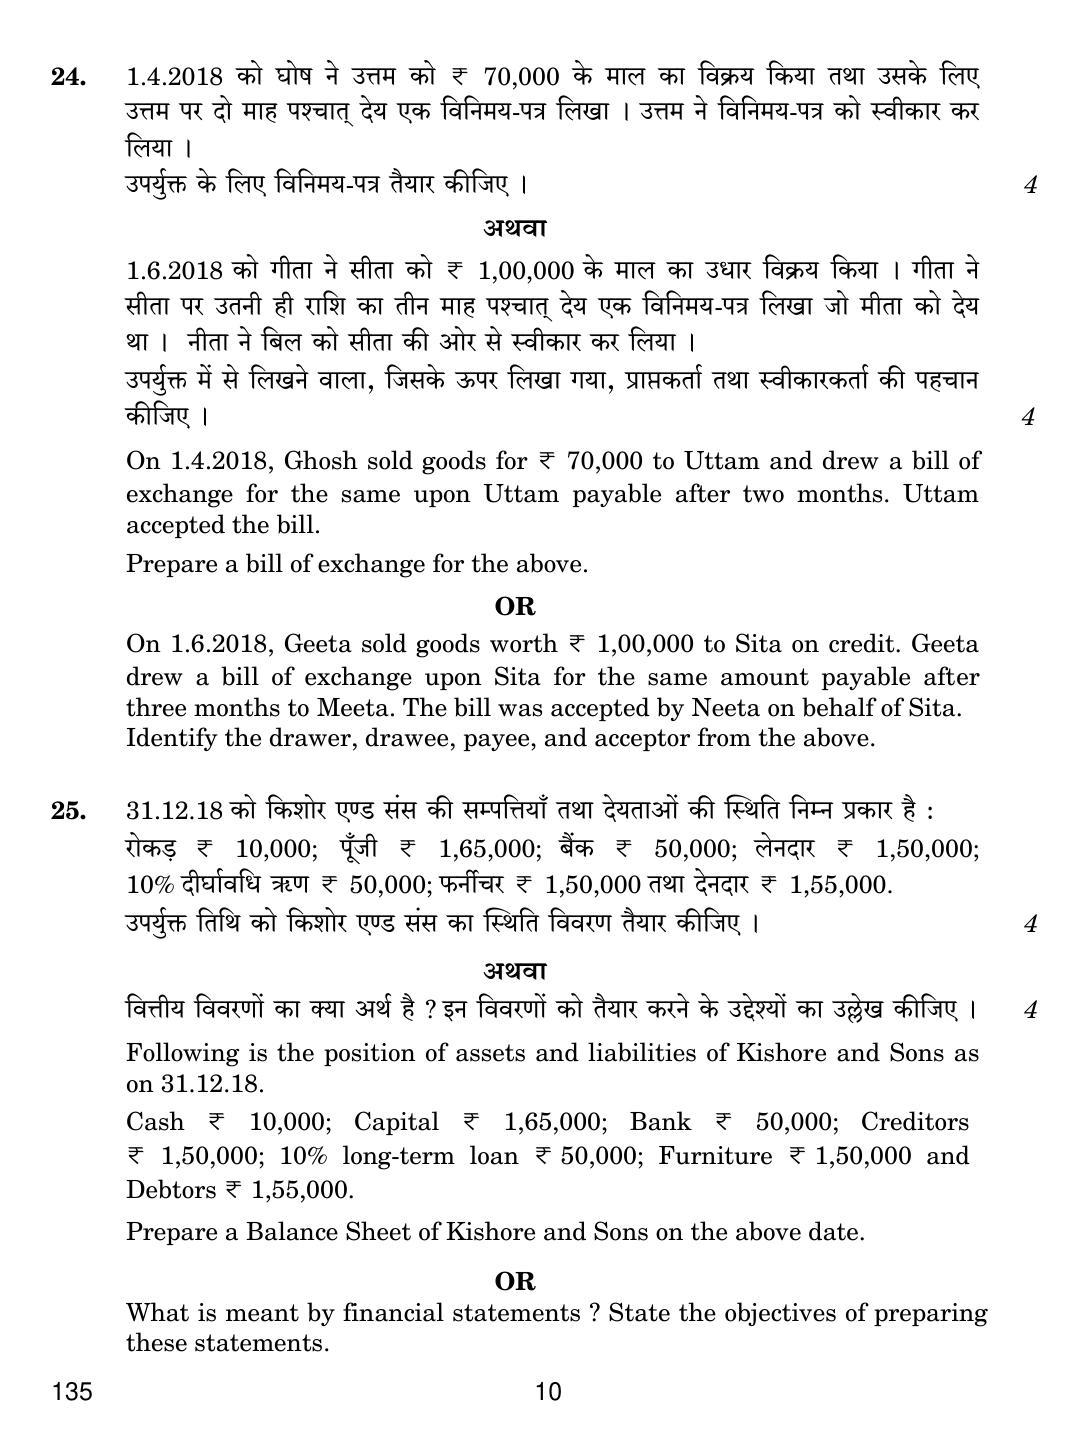 CBSE Class 10 135 ELEMENTS OF BOOK-KEEPING AND ACCOUNTANCY (COMMERCE) 2019 Question Paper - Page 10